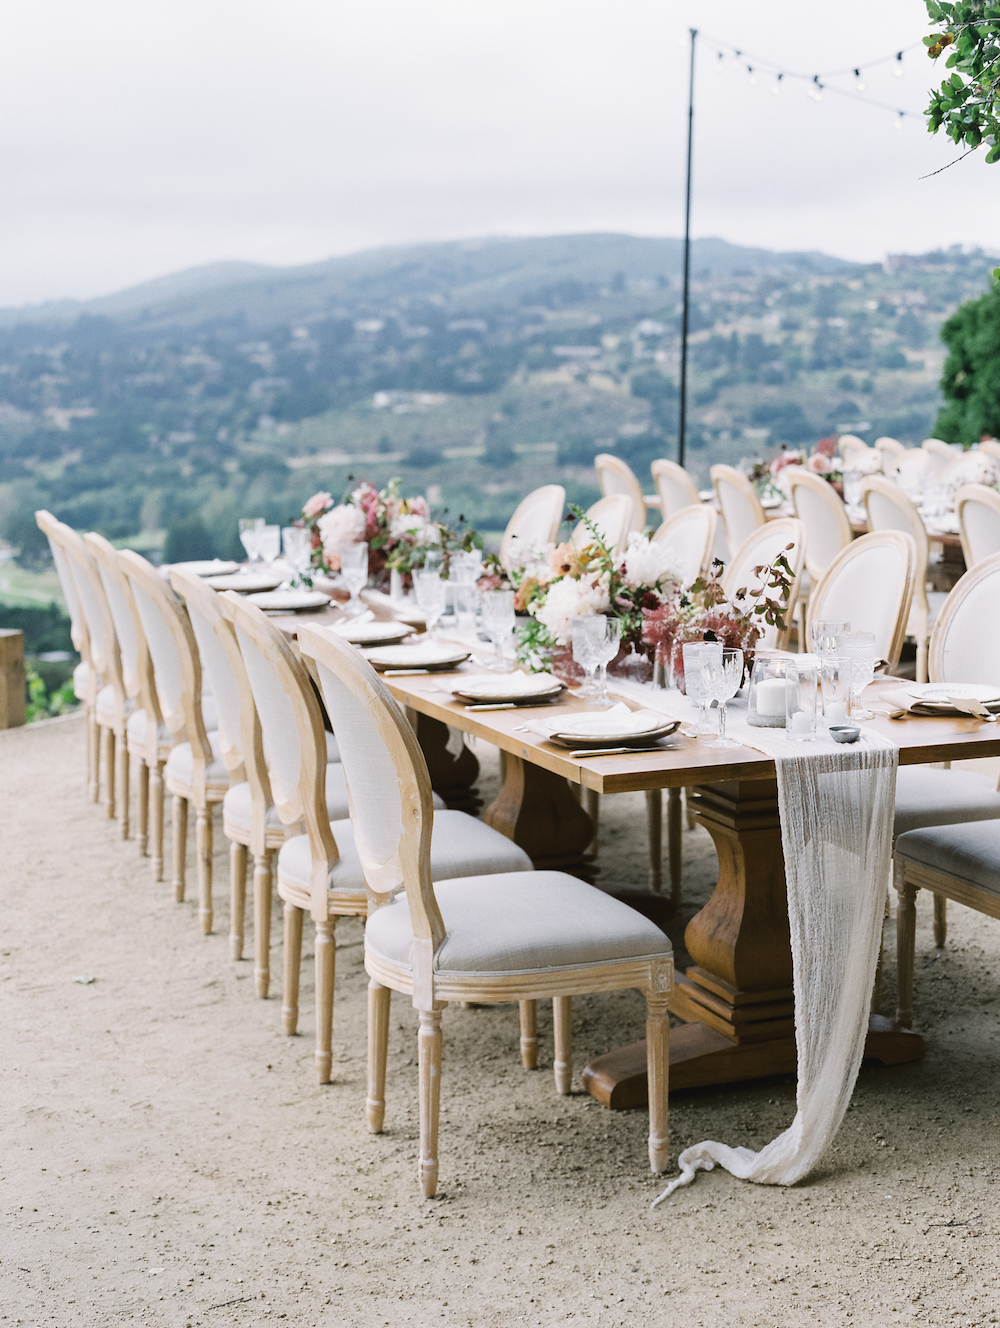  We suggested this dining configuration so each guest had a view of the valley beyond. Environment, atmosphere, and experiential design are everything.  Photo by Michele Beckwith. Event design by Lambert Floral Studio. 